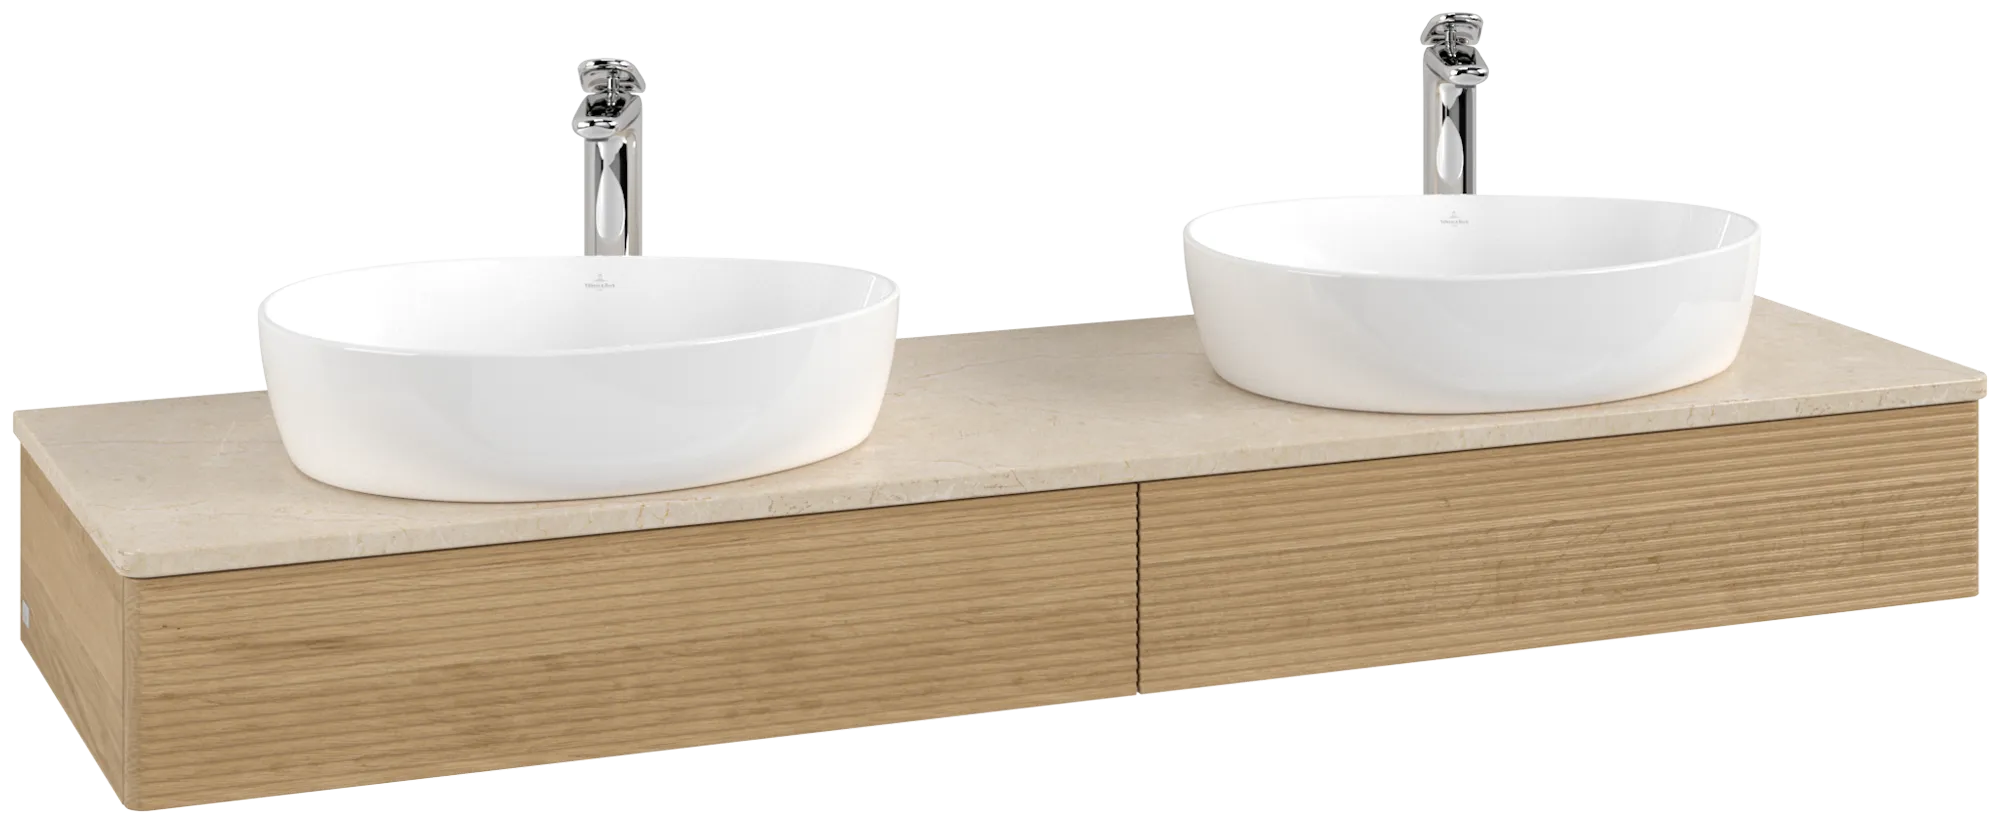 Picture of VILLEROY BOCH Antao Vanity unit, with lighting, 2 pull-out compartments, 1600 x 190 x 500 mm, Front with grain texture, Honey Oak / Botticino #L17153HN